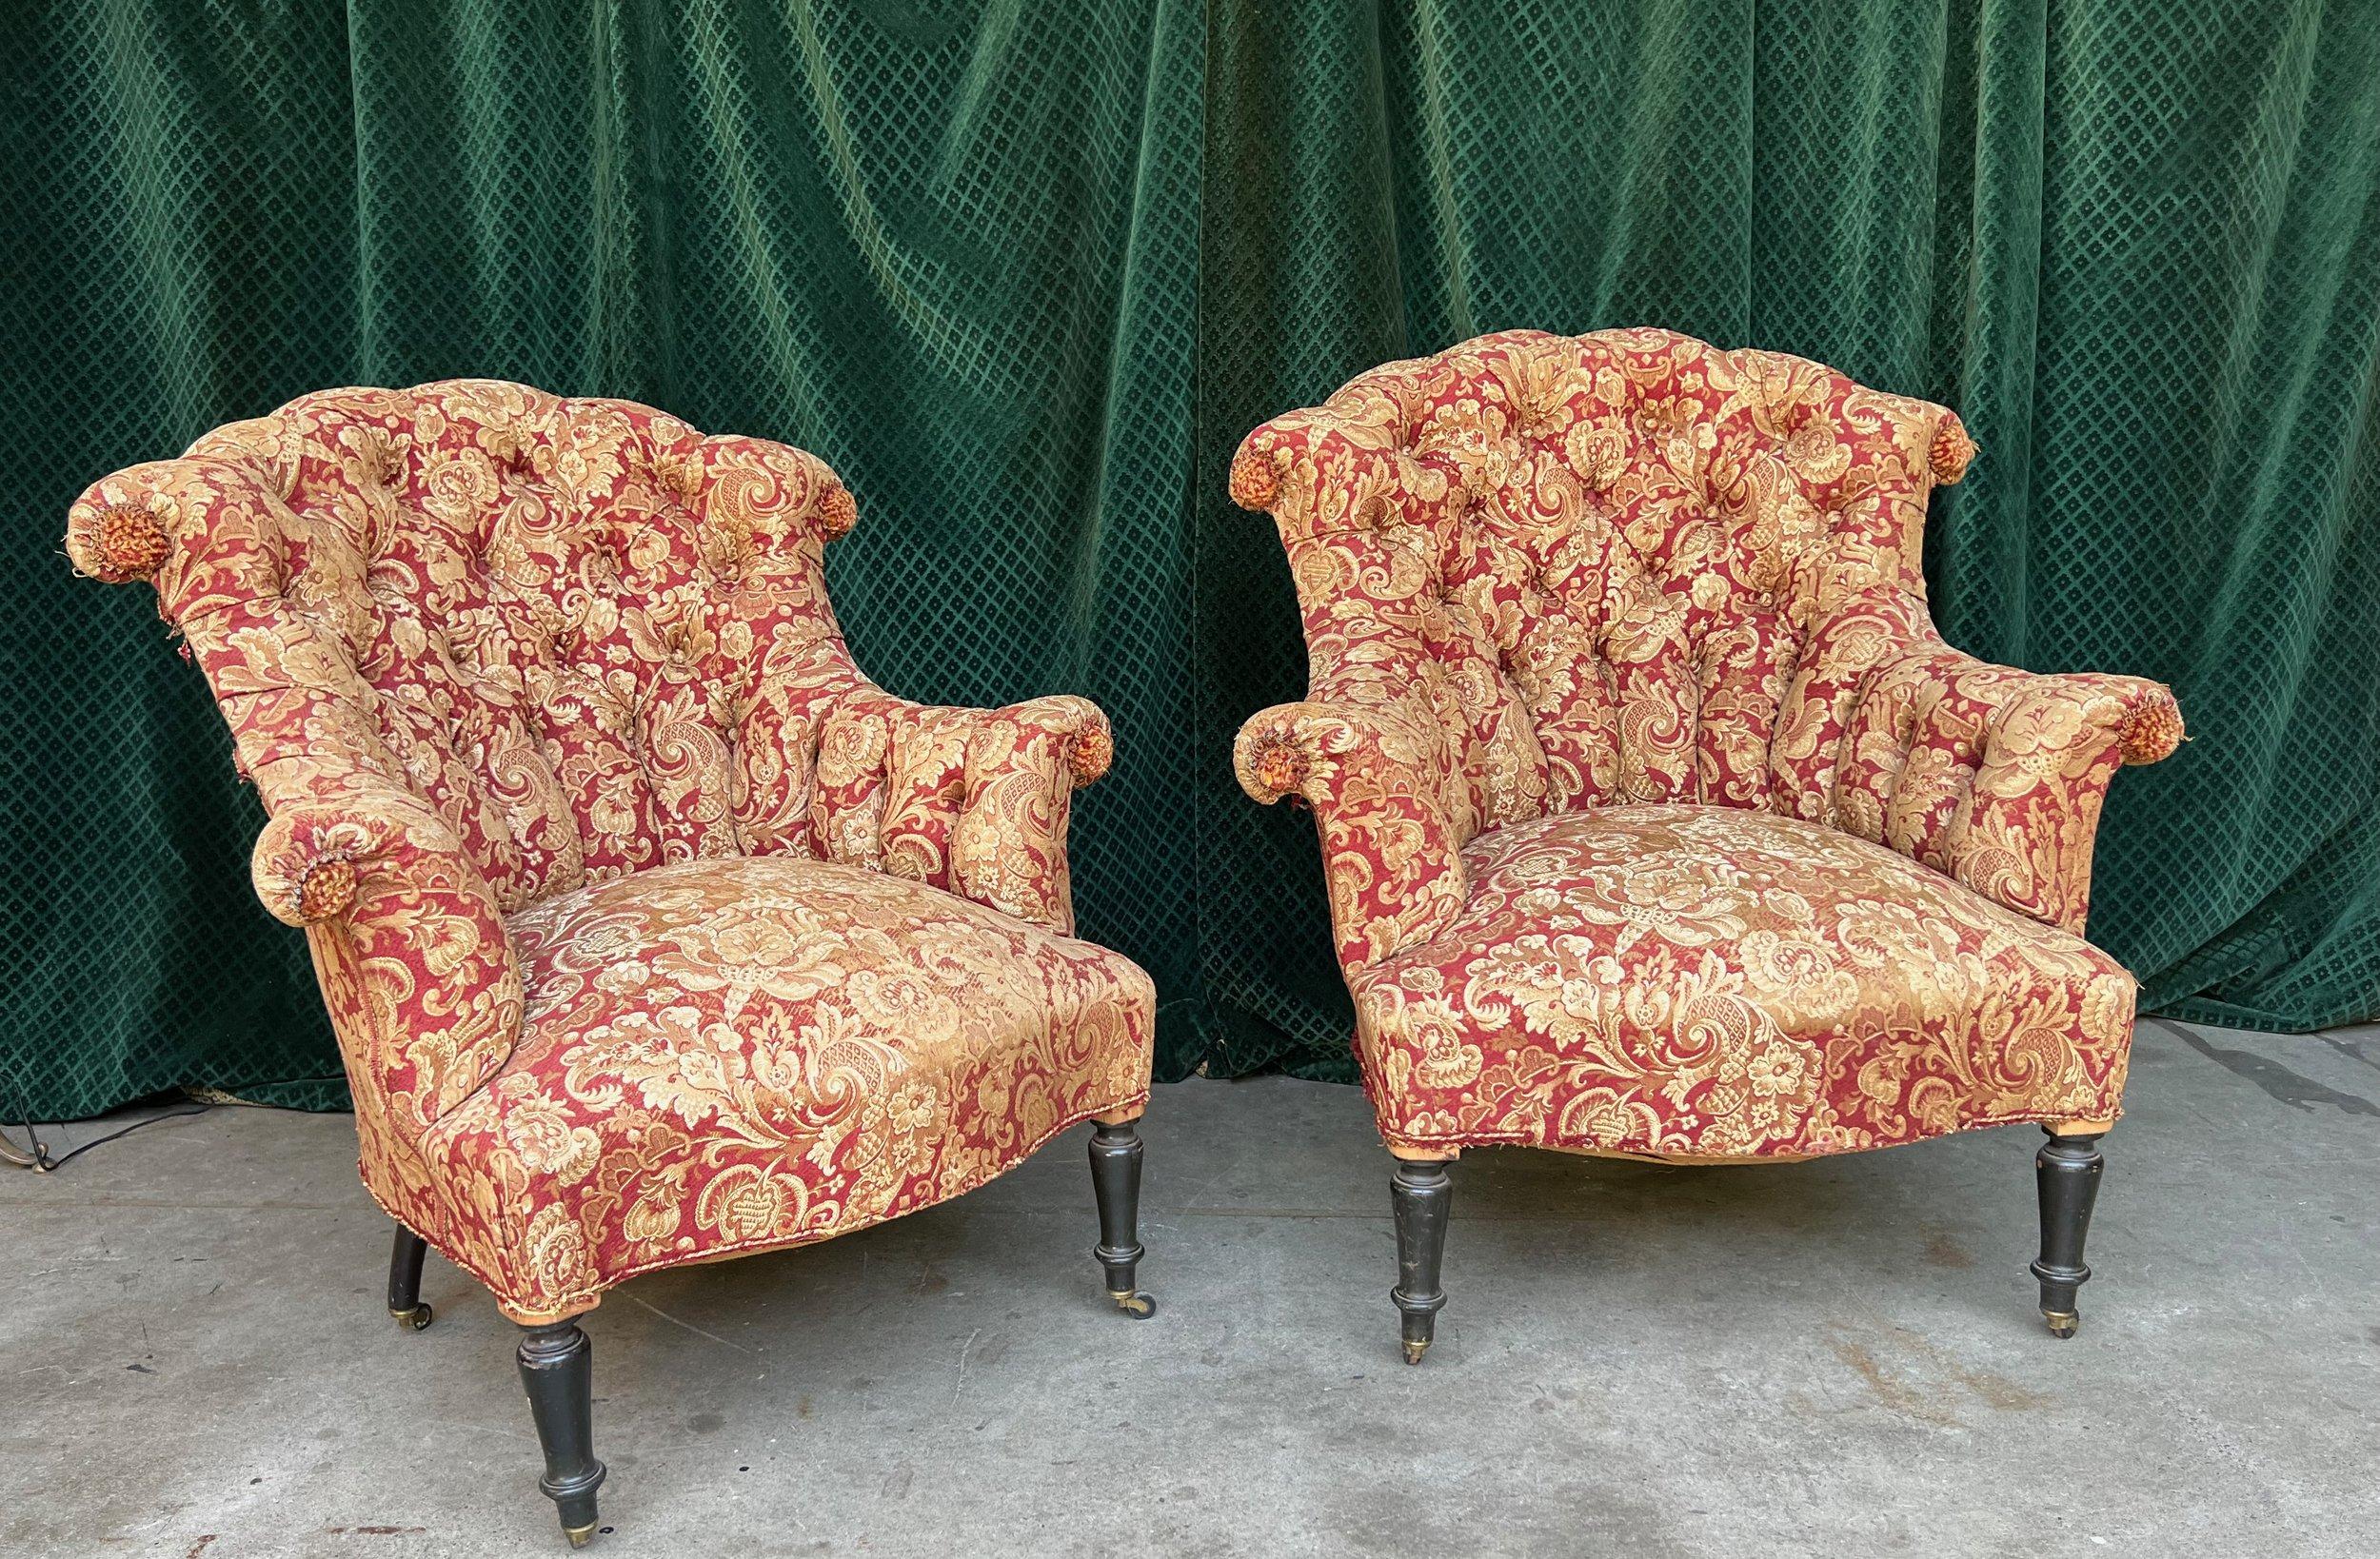 Pair of Tufted and Scrolled Back Chairs in Printed Velvet For Sale 7